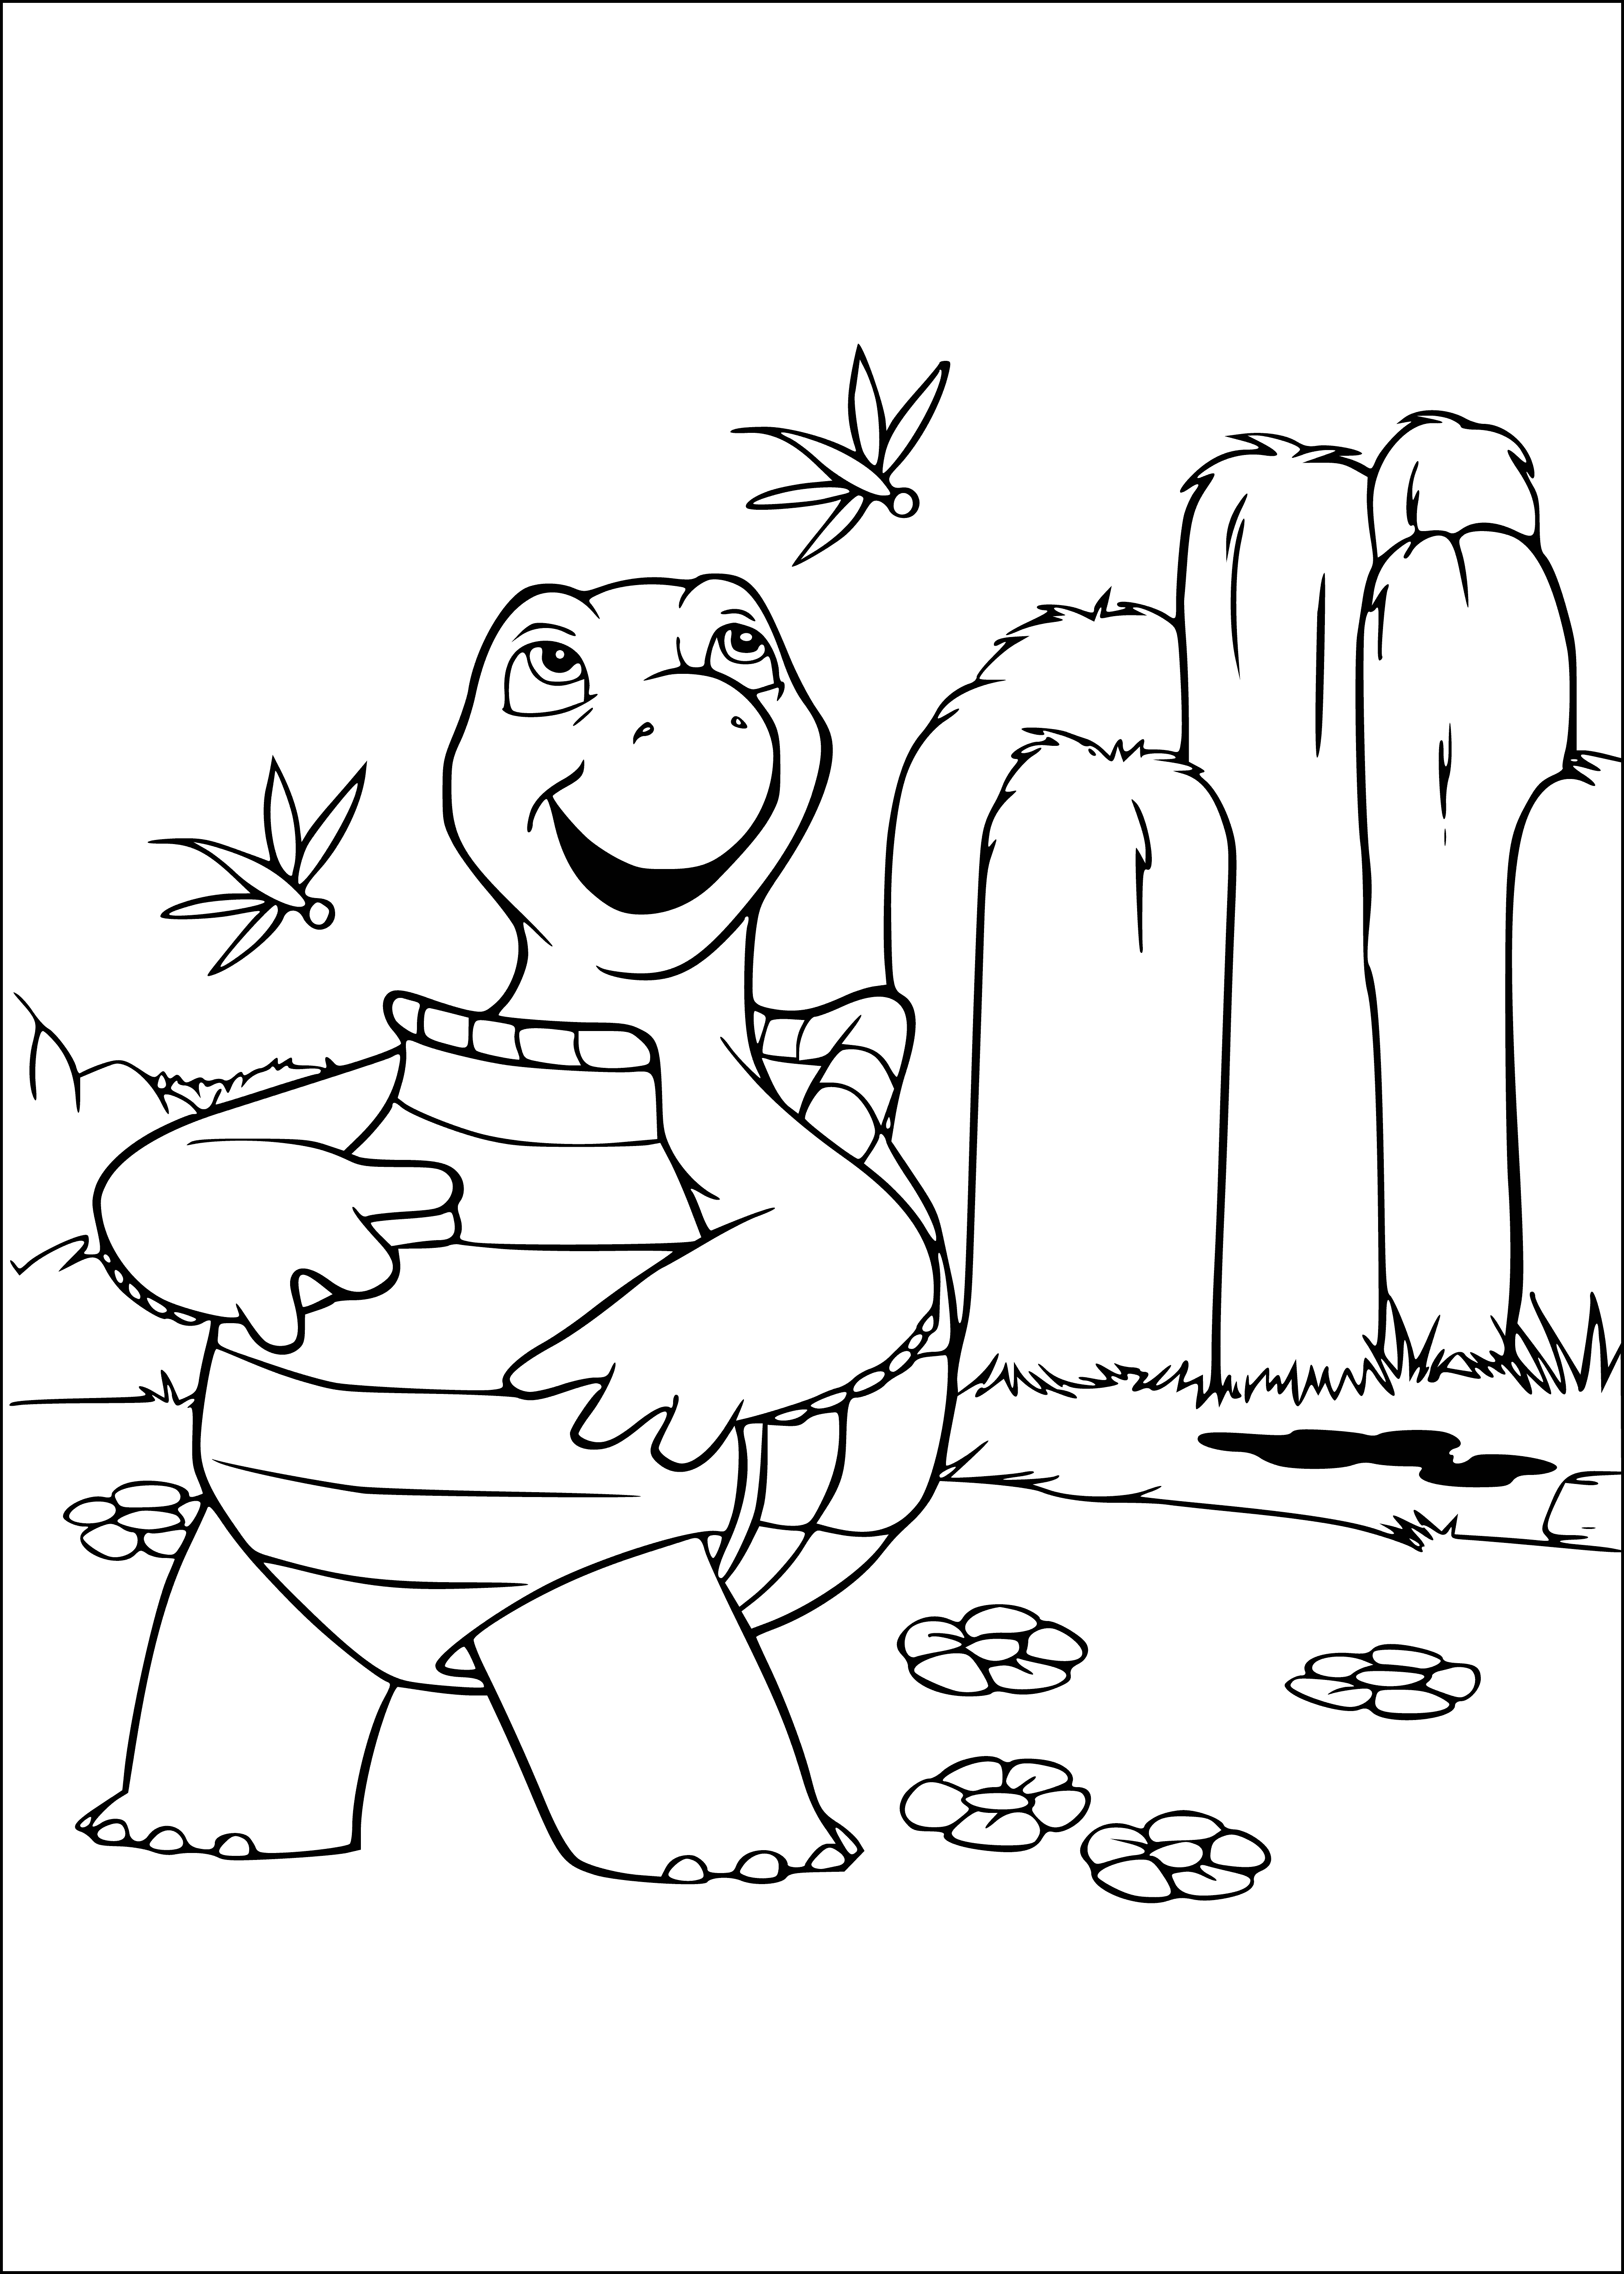 coloring page: A small scaly green reptile perched atop a large brown rock looks ahead with its small eyes.